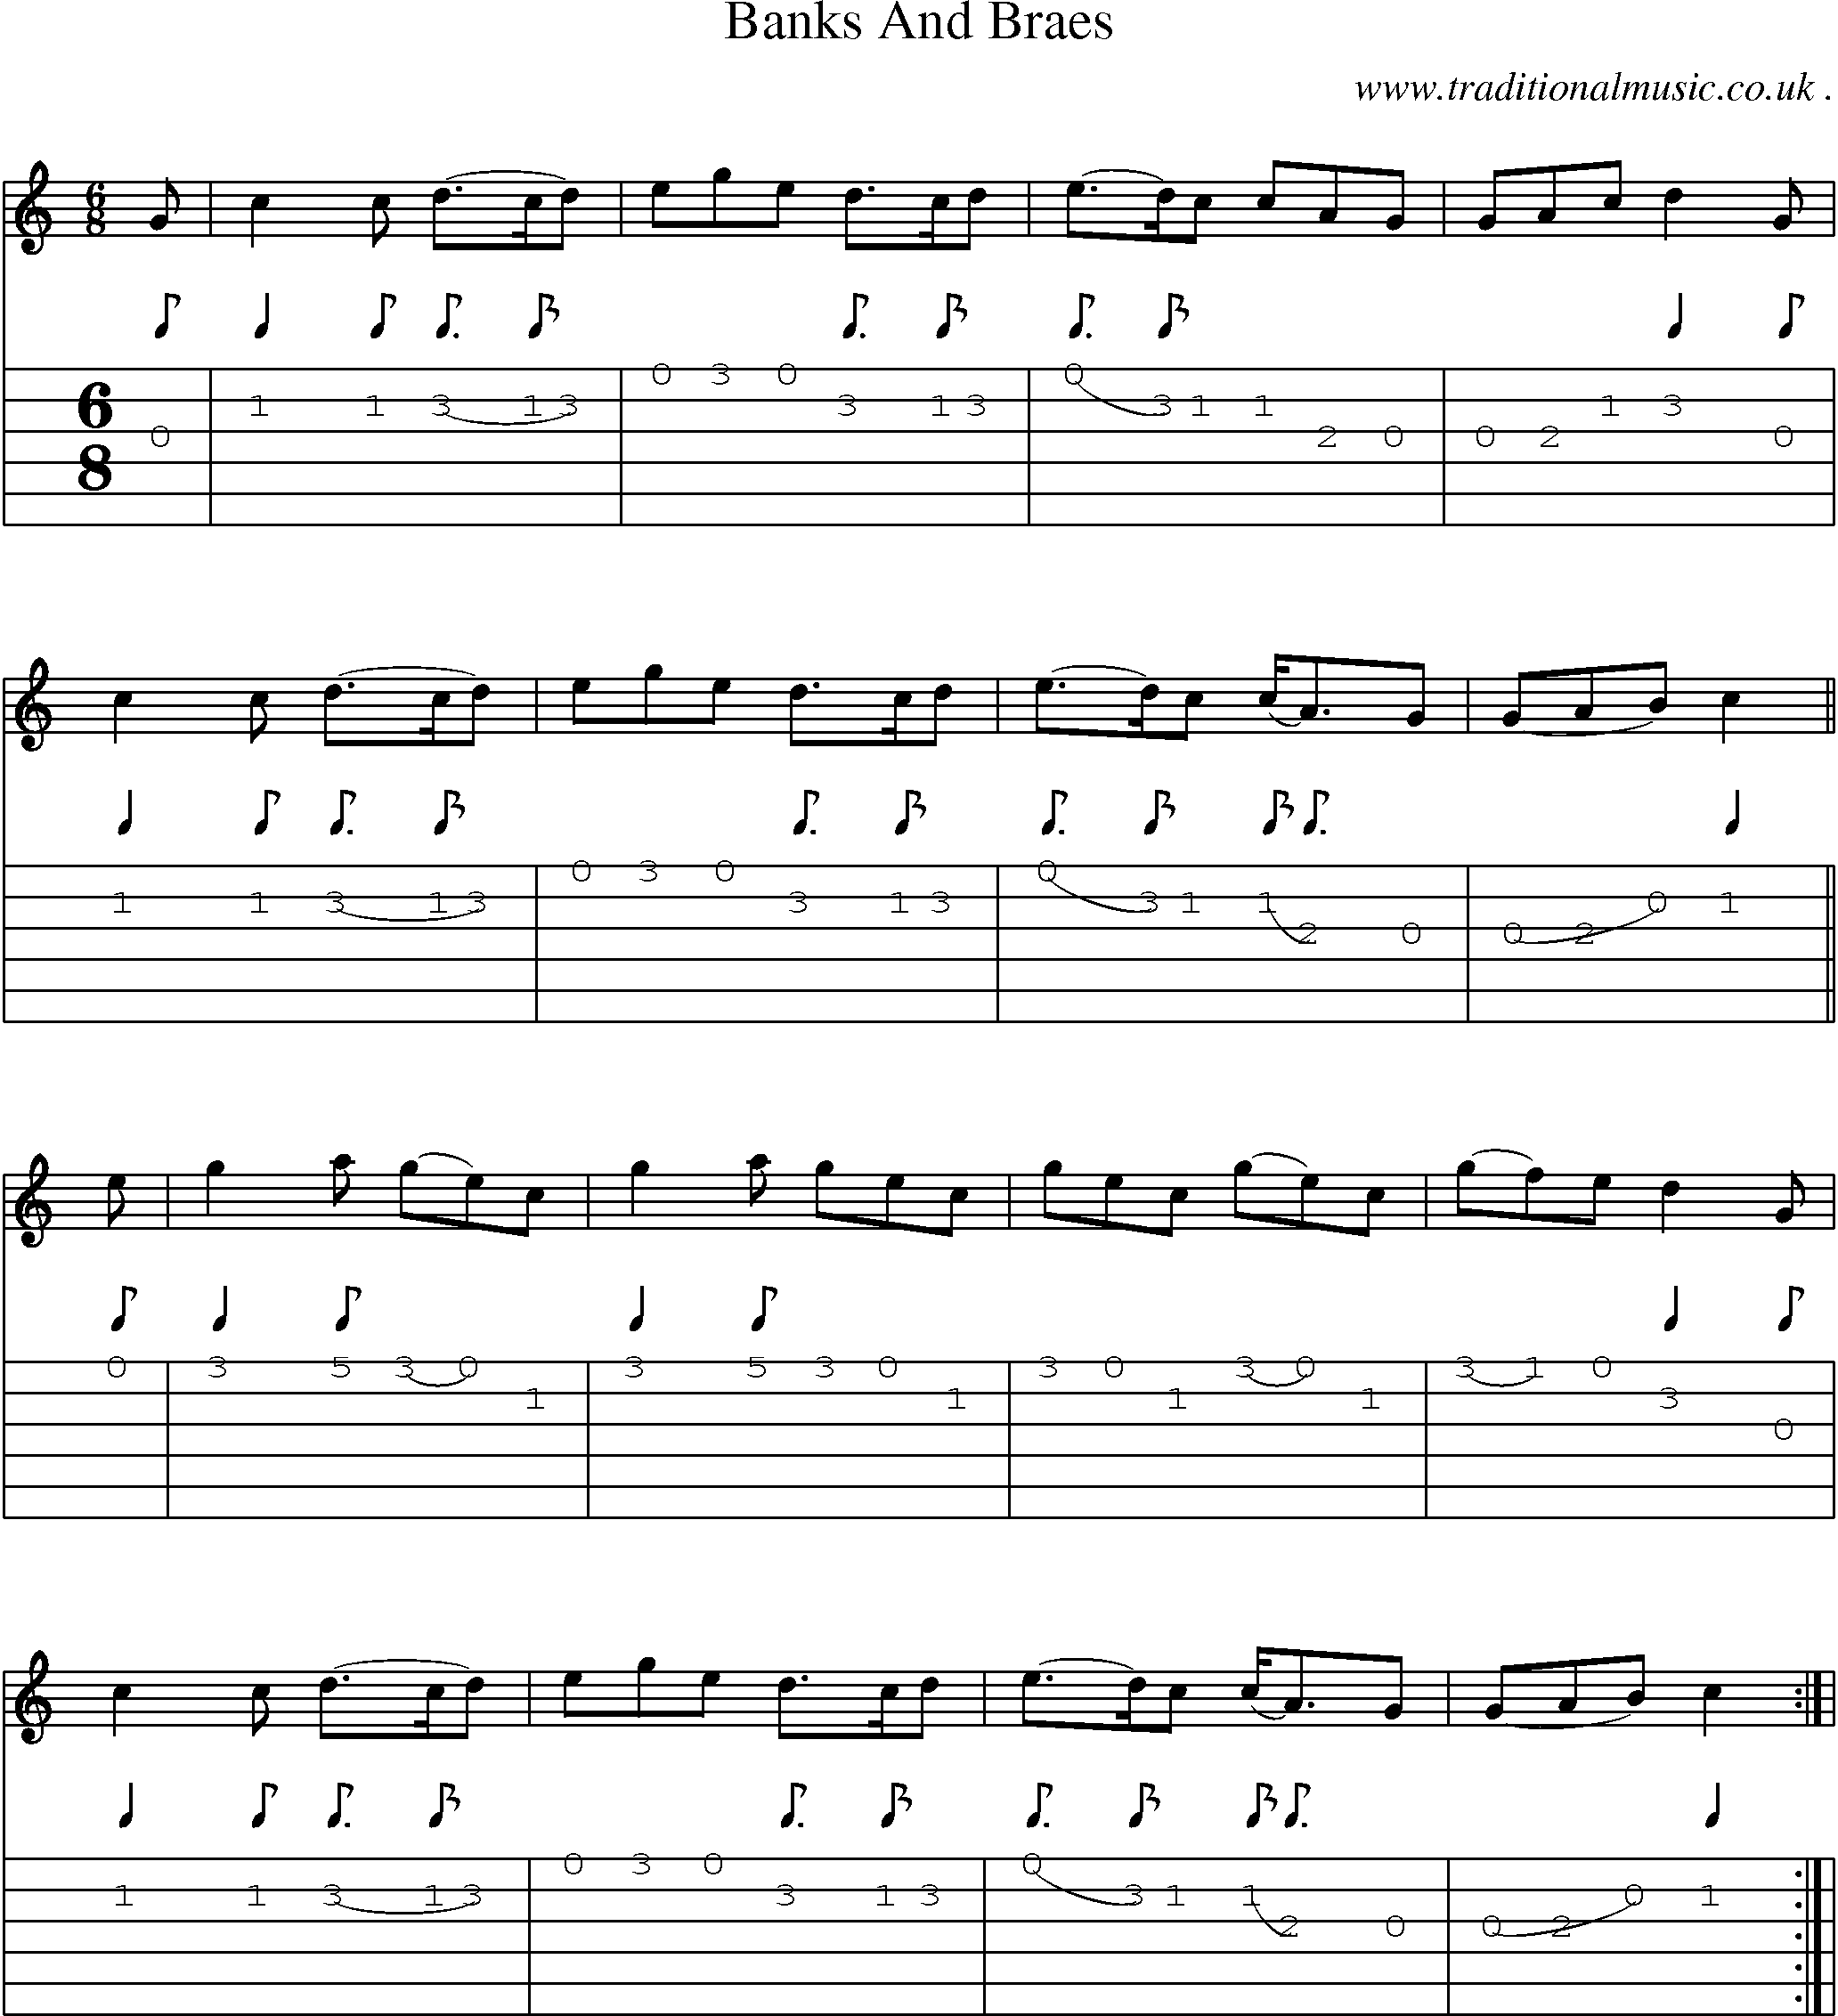 Sheet-Music and Guitar Tabs for Banks And Braes